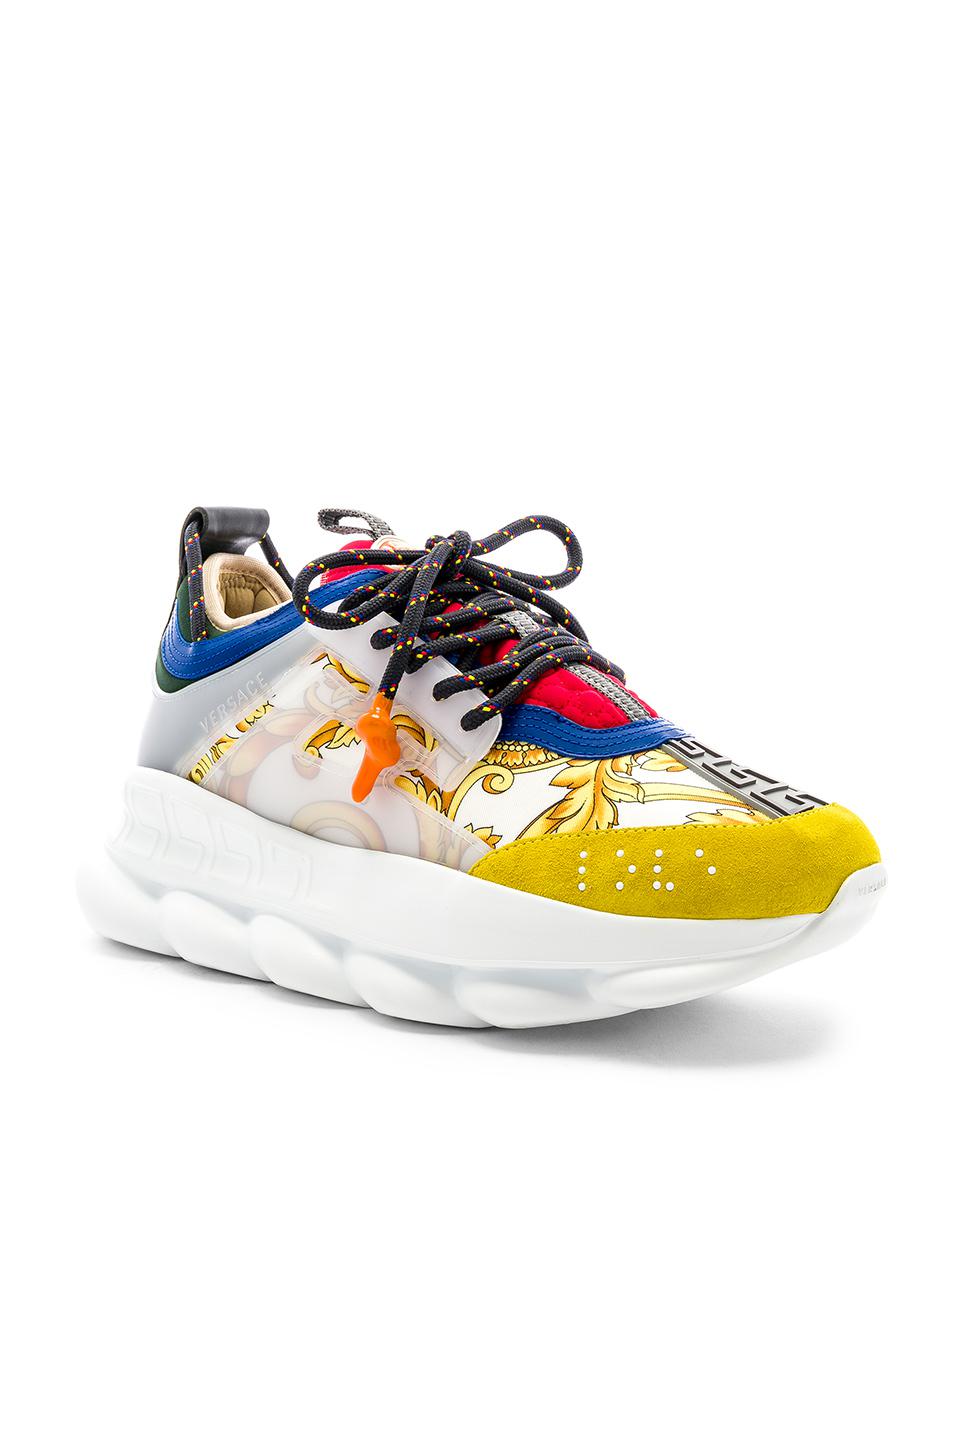 Versace Rubber Chain Reaction Sneakers in White/ Gold (Blue) for Men - Lyst